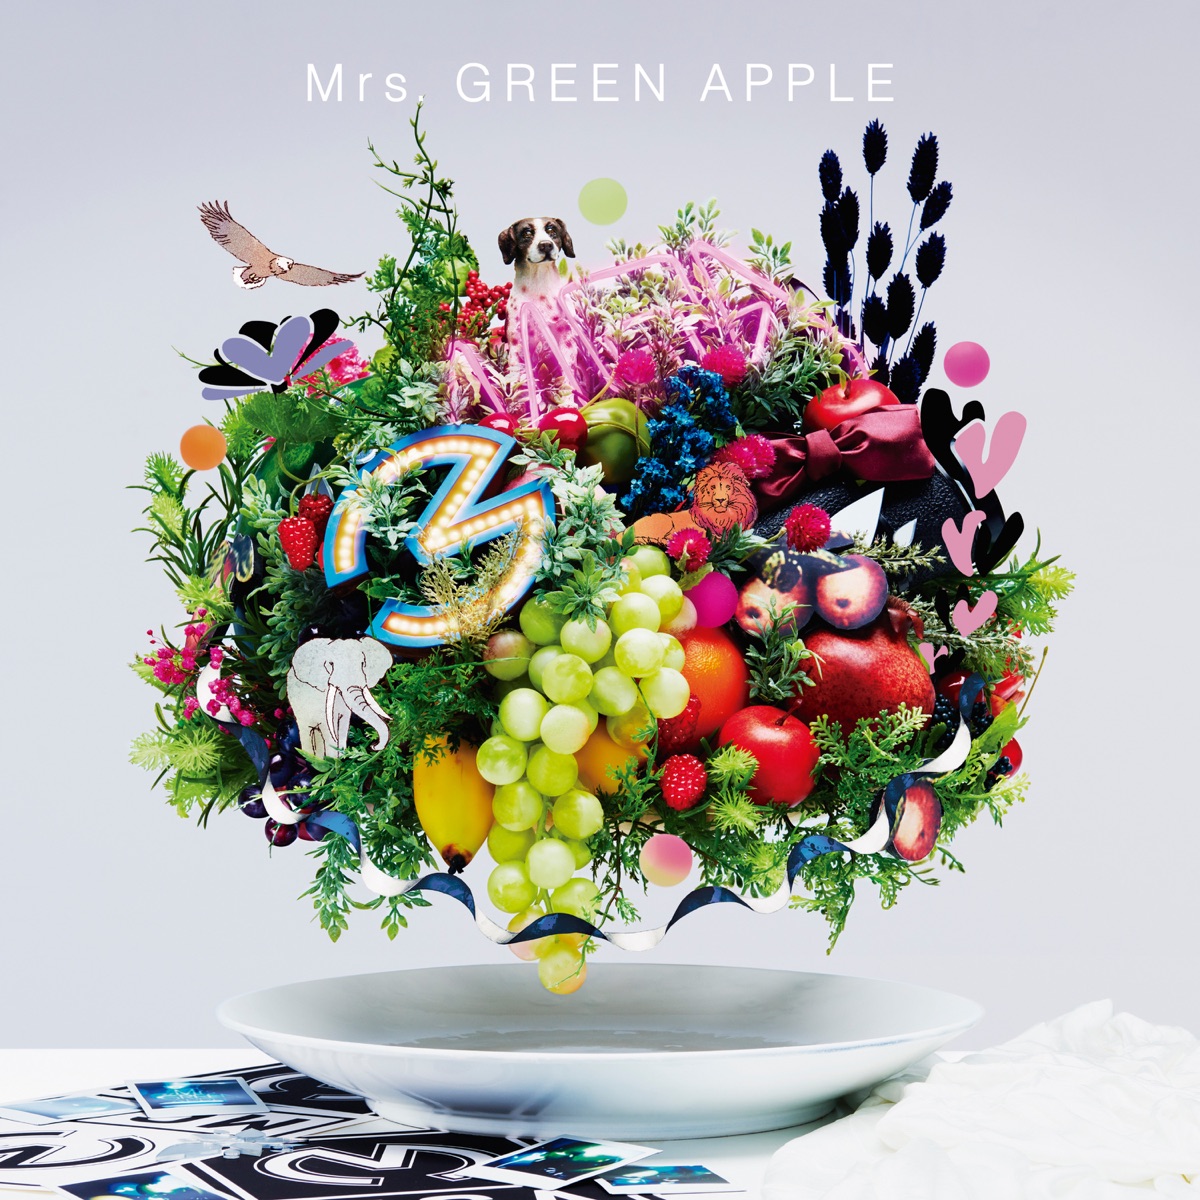 In the Morning - EP - Album by Mrs. Green Apple - Apple Music